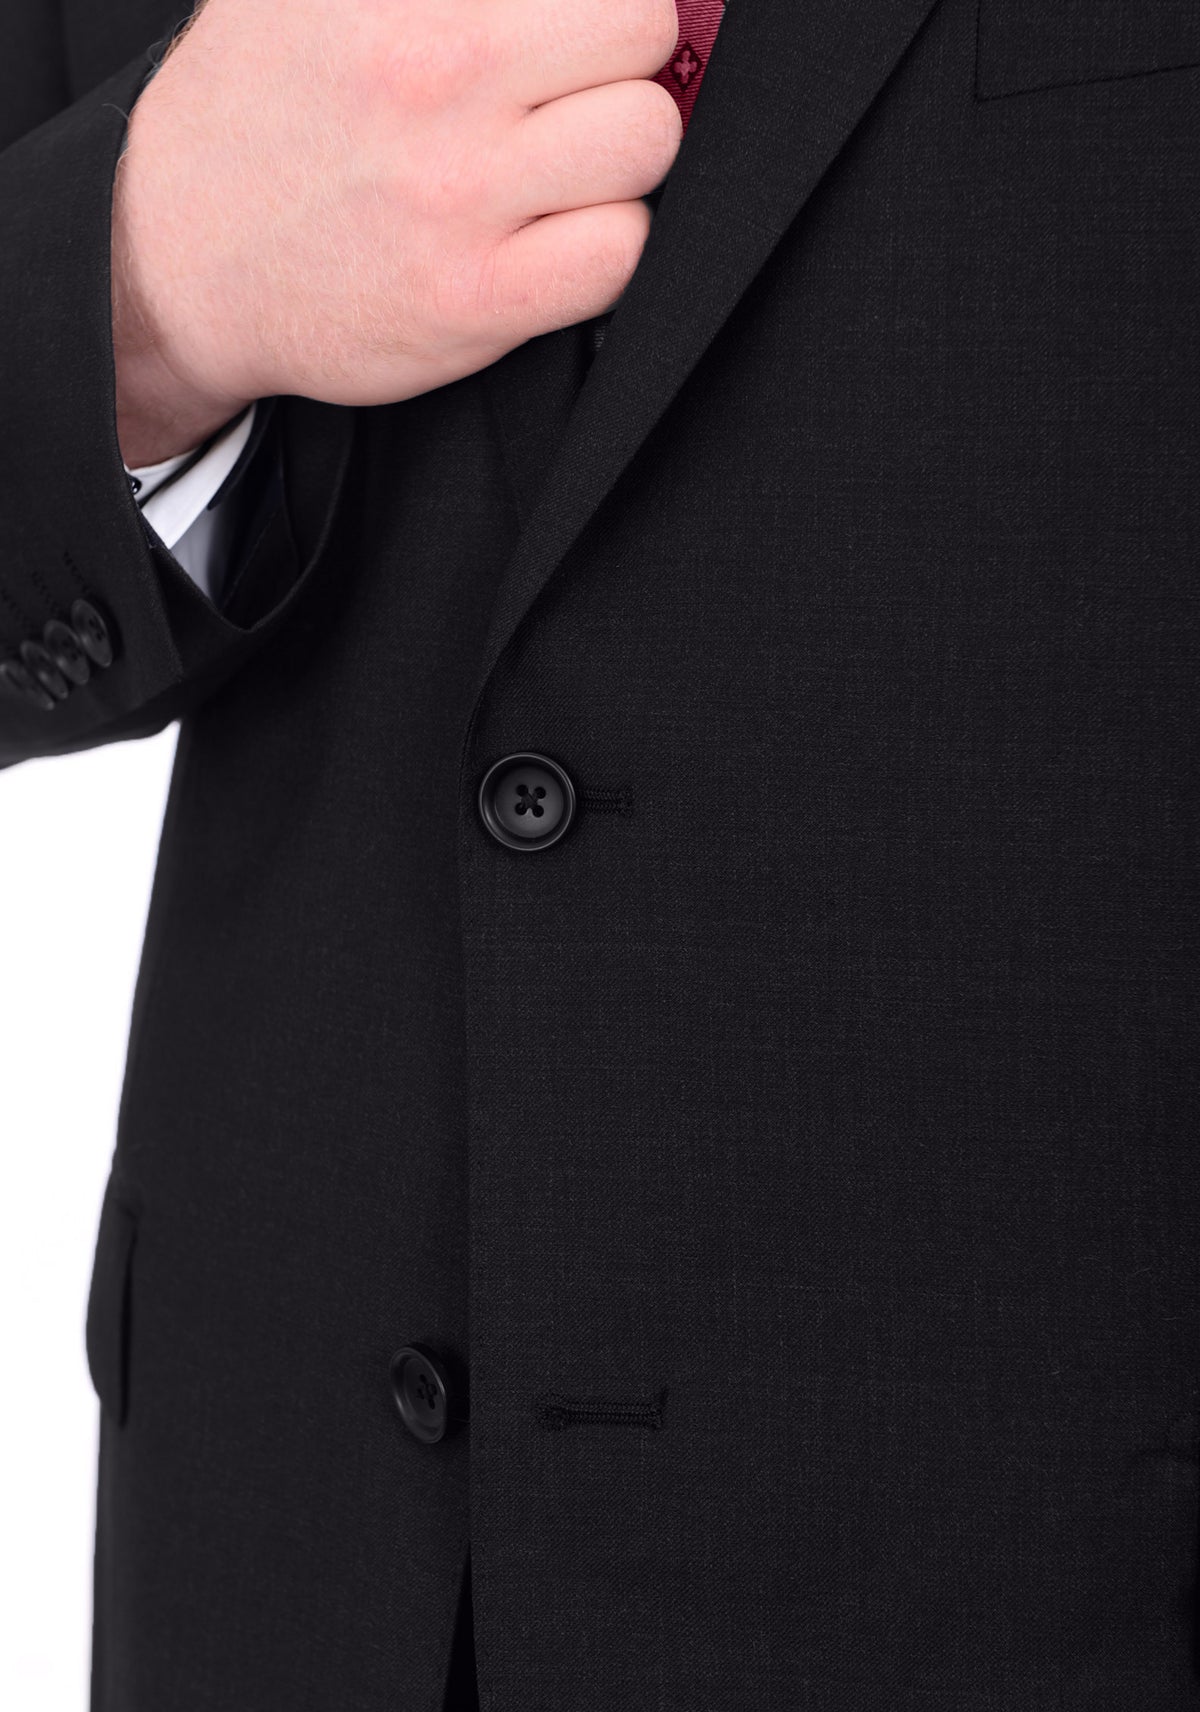 Mens Portly Fit Solid Black Two Button Wool Blazer Suit Jacket